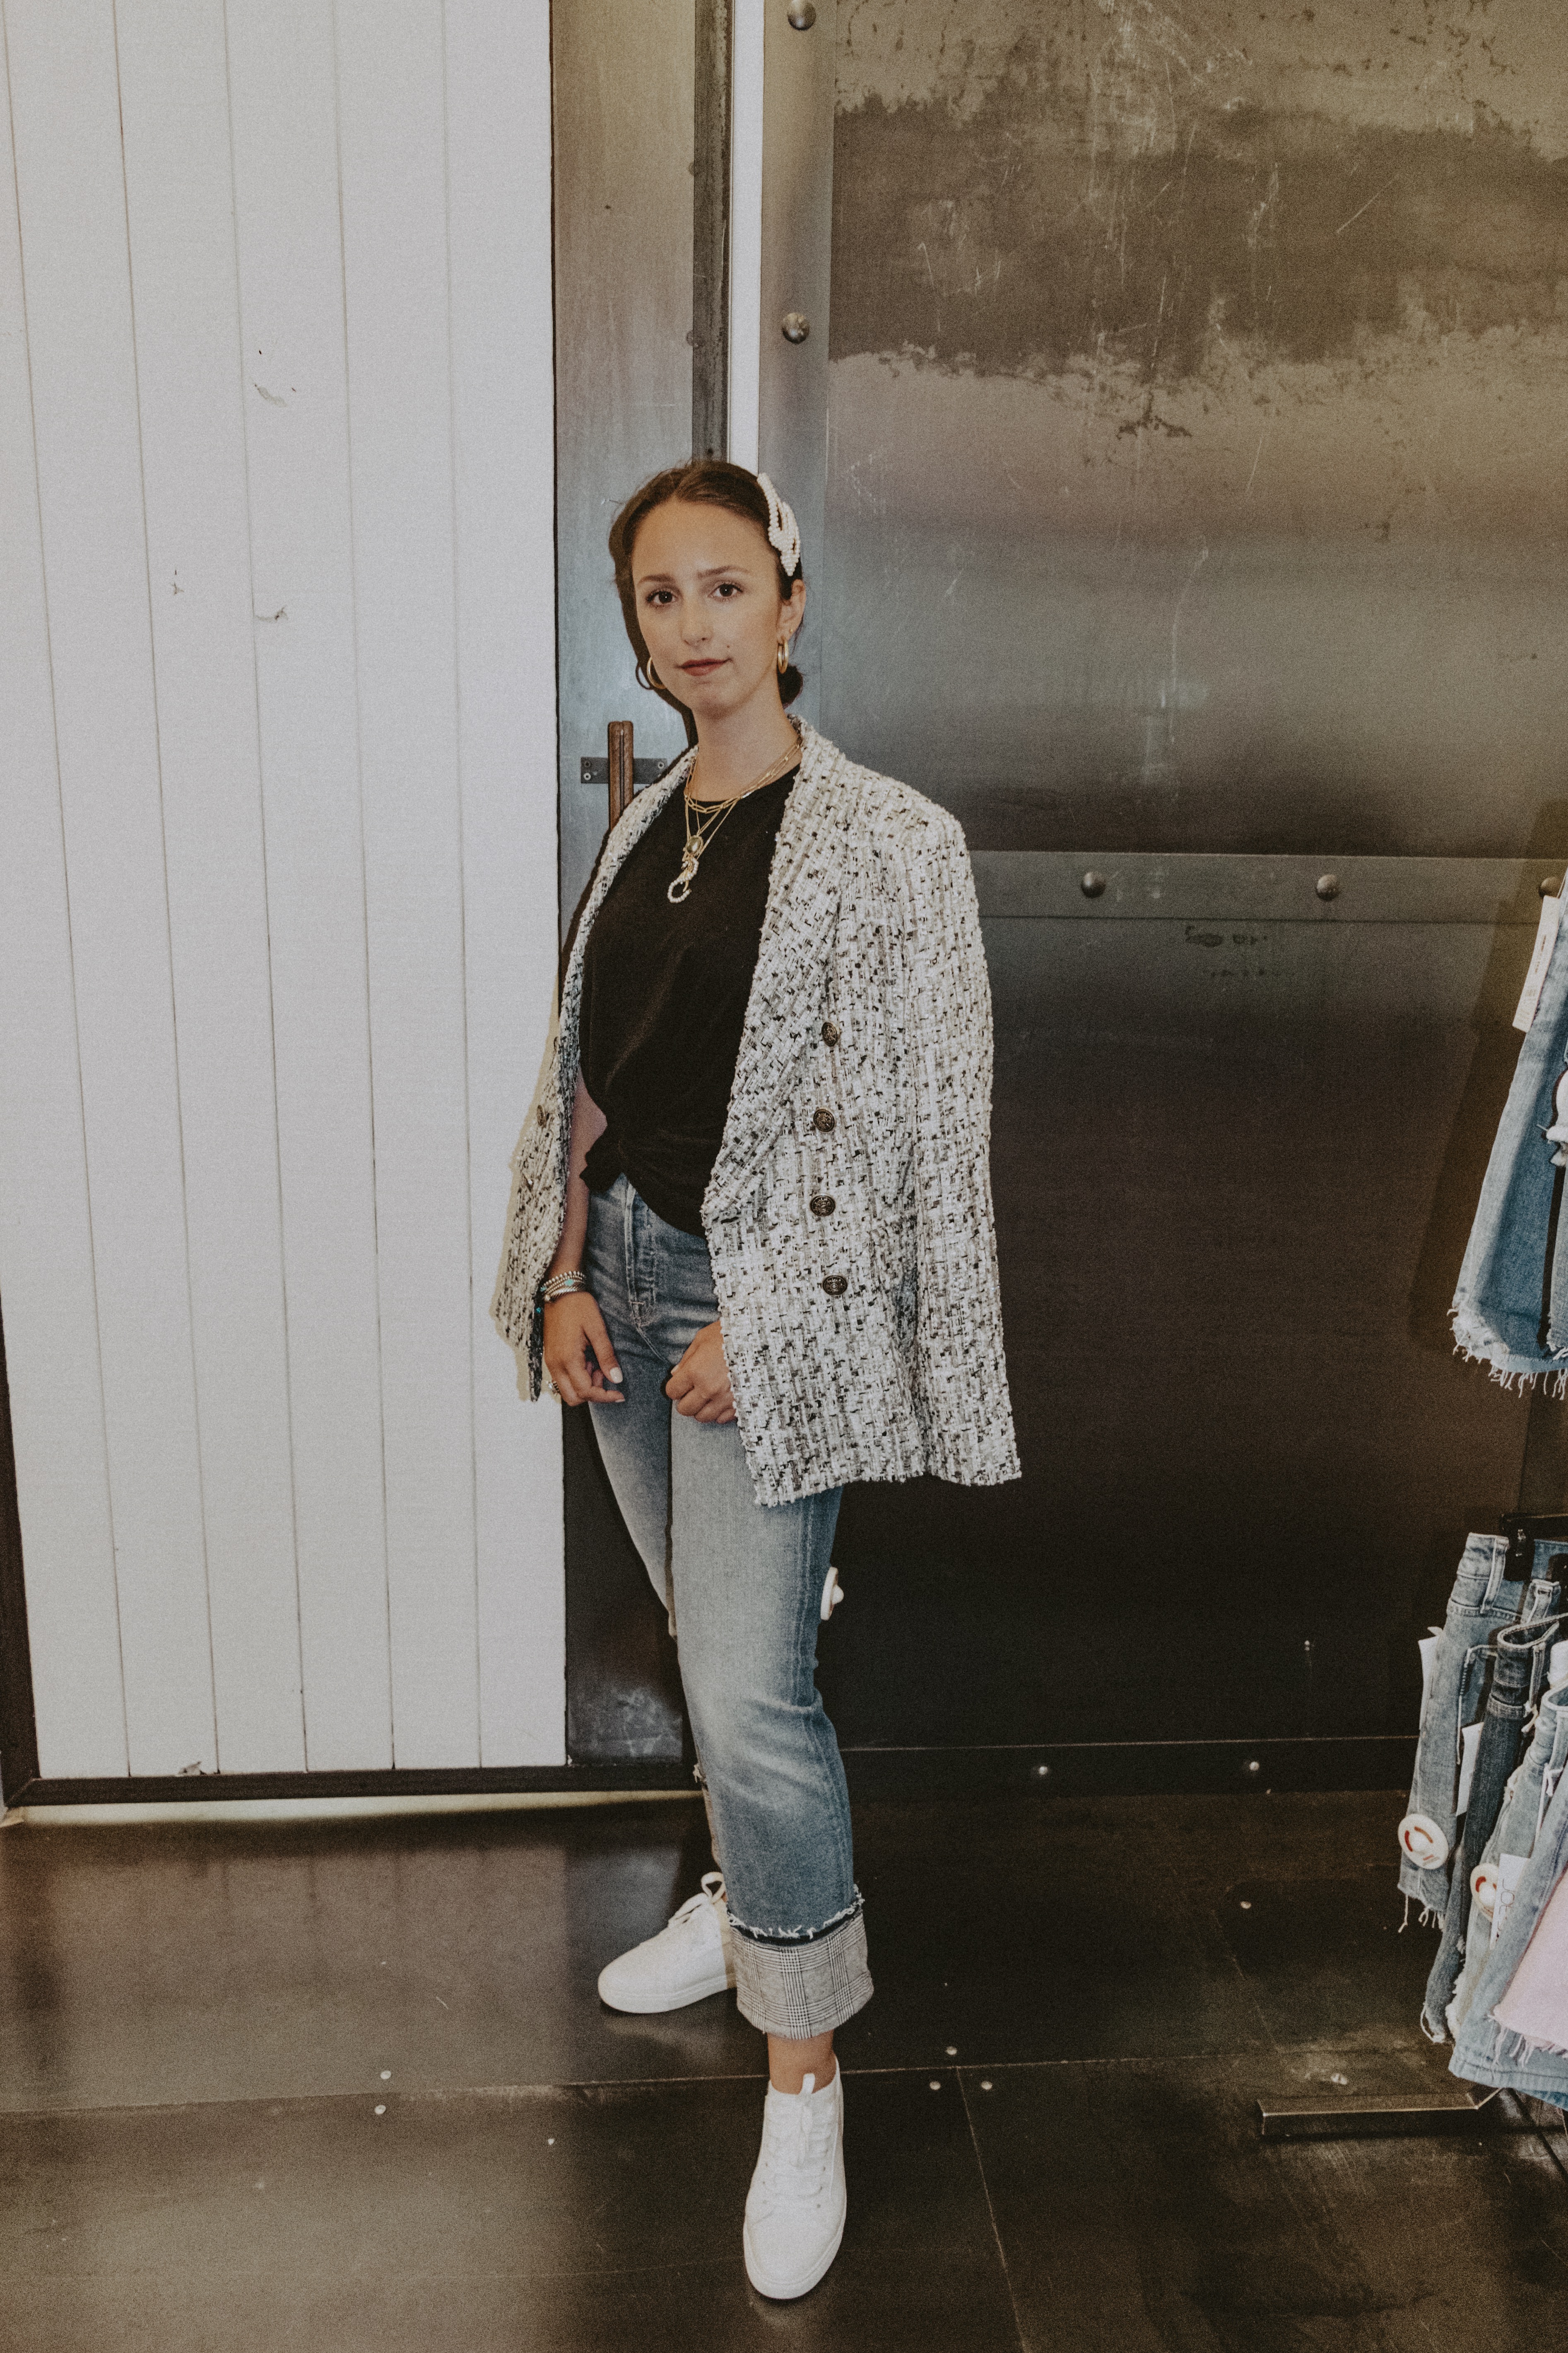 Bloomingdale's White Plains Denim Days Sale - Why To Shop In-Store #bloomigndales #fall #fallfashion #fallstyle #falloutfit #denin #jeans #designersale #designerdenim #7fam #7forallmankind #blazer #fashion #outfit #style #shopping #sale